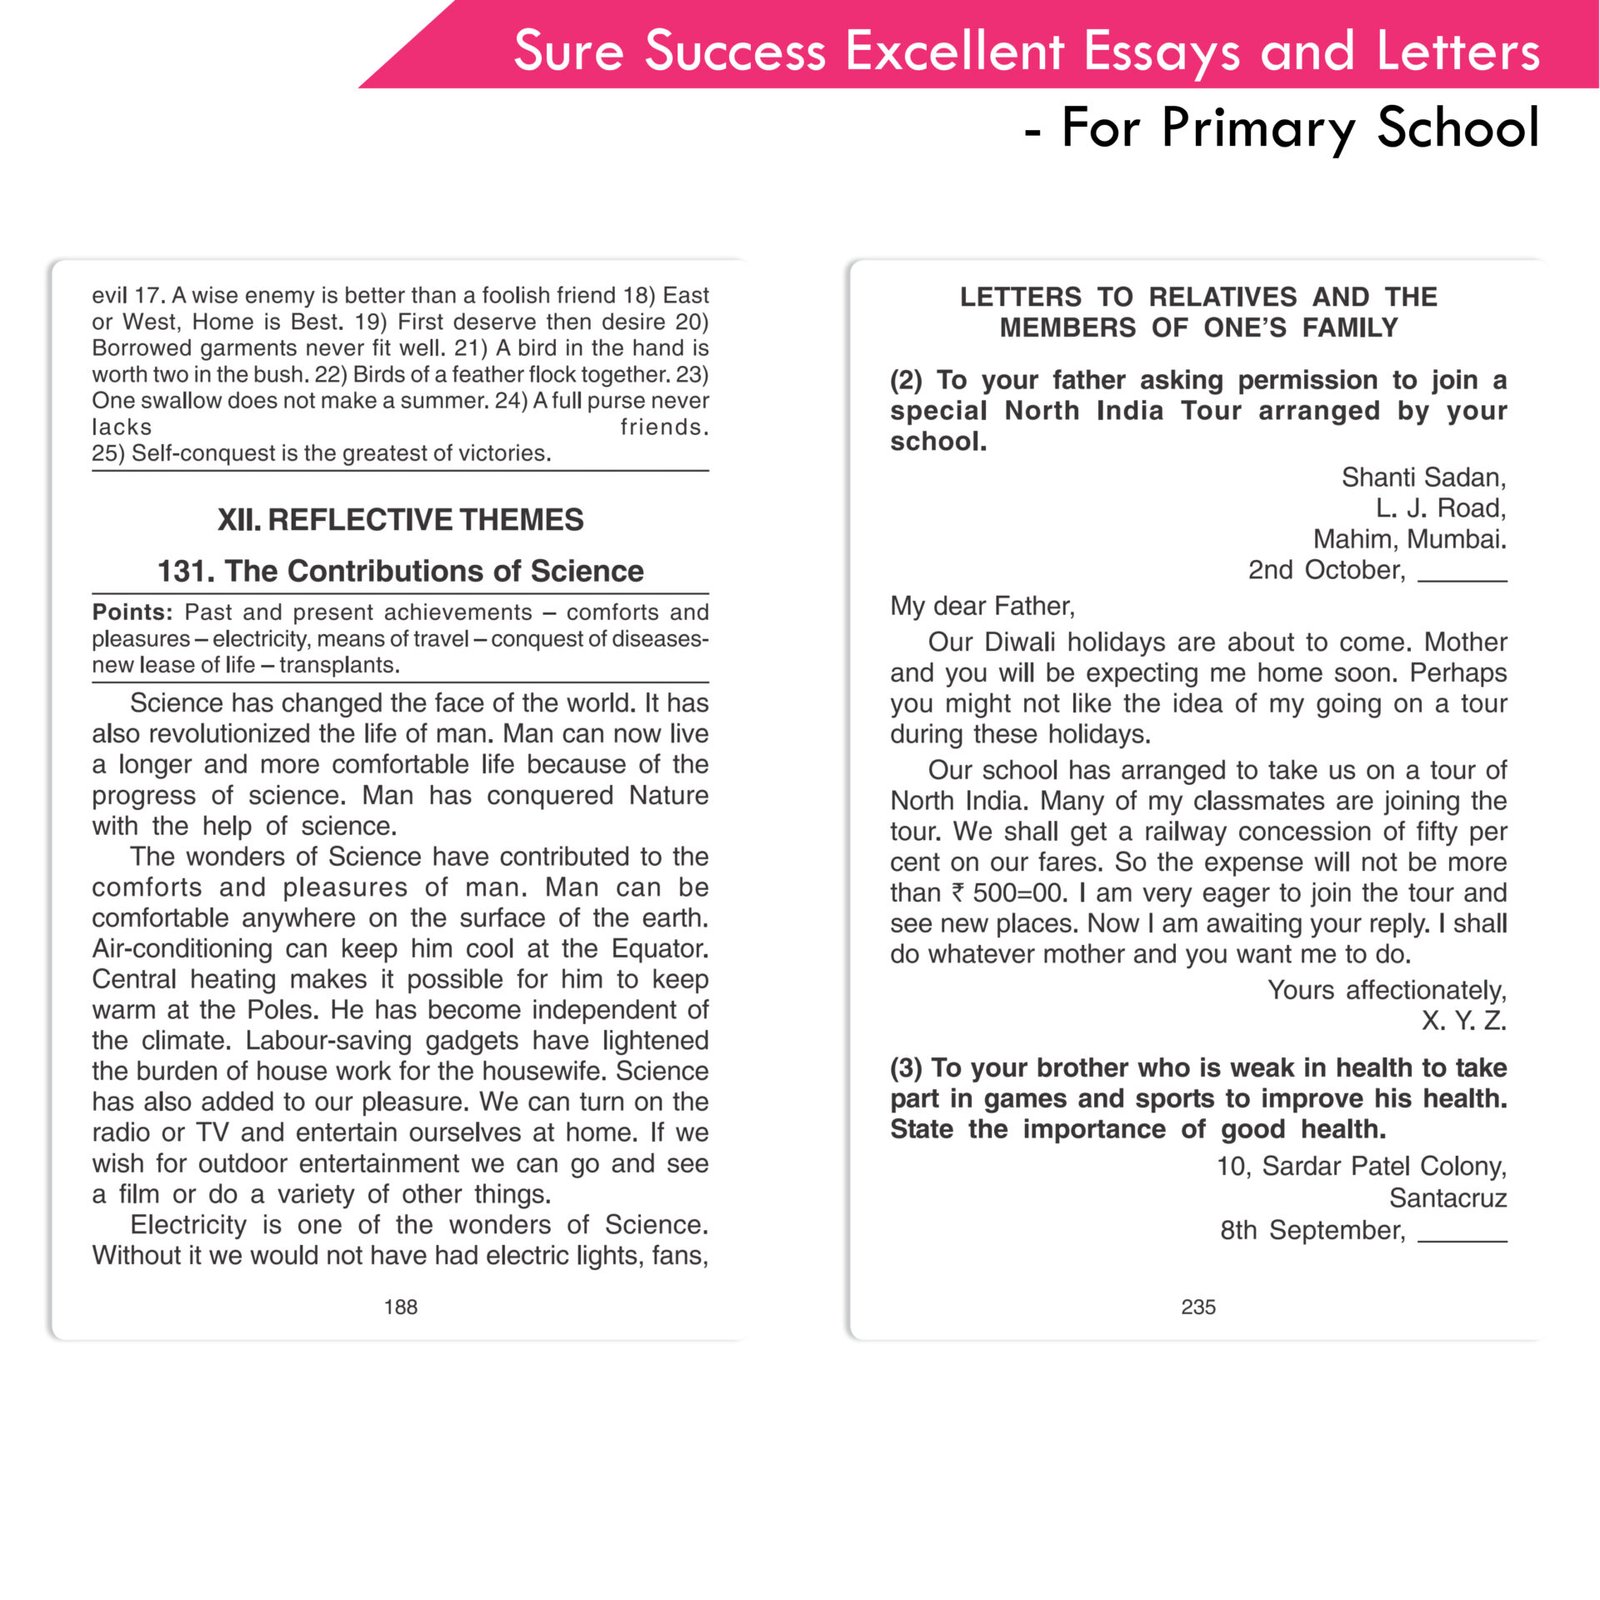 Sure Success Excellent Essays and Letters For Primary School 9